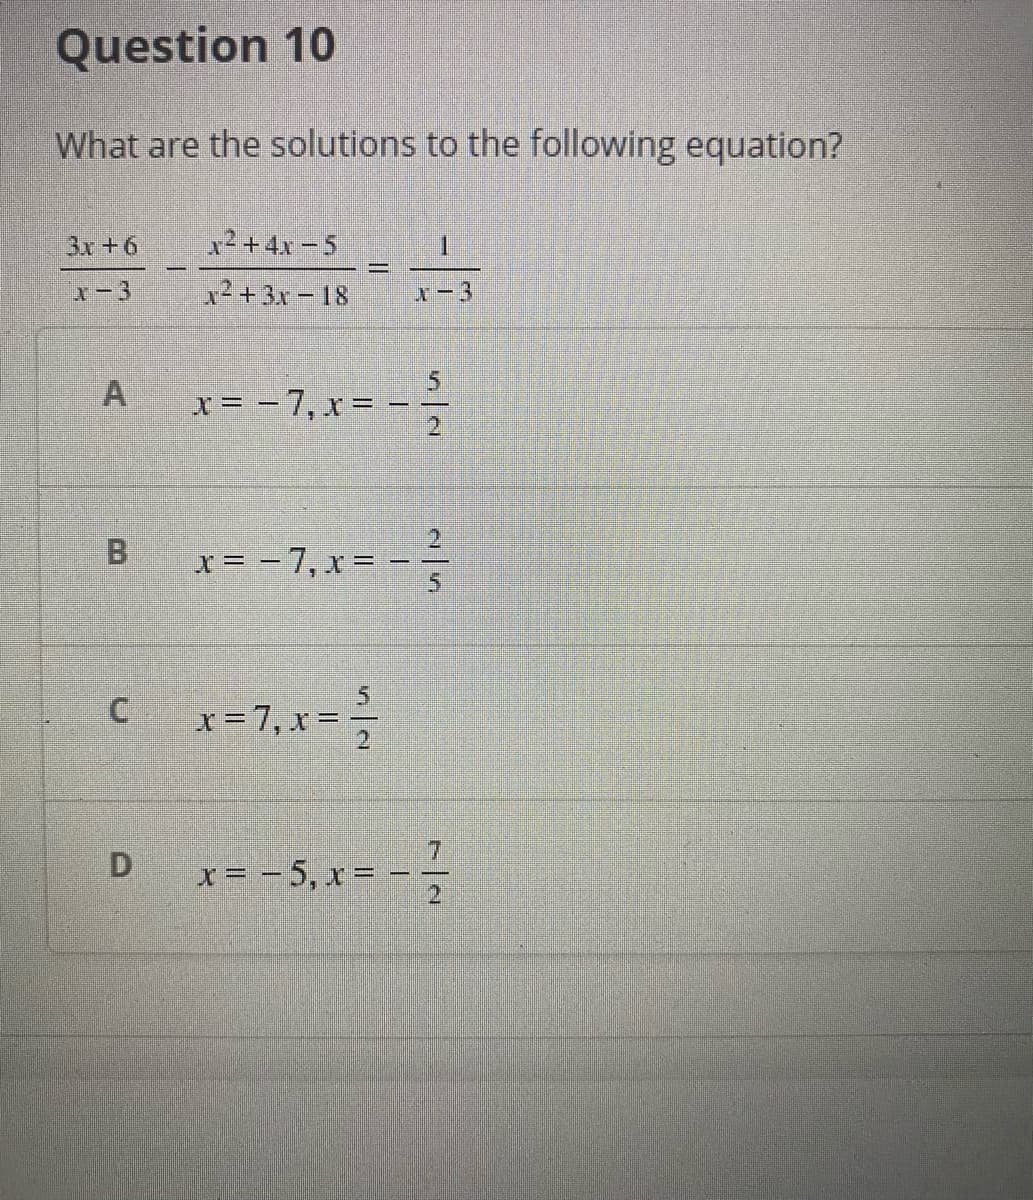 Question 10
What are the solutions to the following equation?
3x +6
12 +4x – 5
1.
%3D
X-3
x²+3x-18
x-3
5.
x = - 7, x = - –
|
2.
x = - 7, x = - -
B.
x = 7, x =
7.
x= - 5, x = - -
A.
